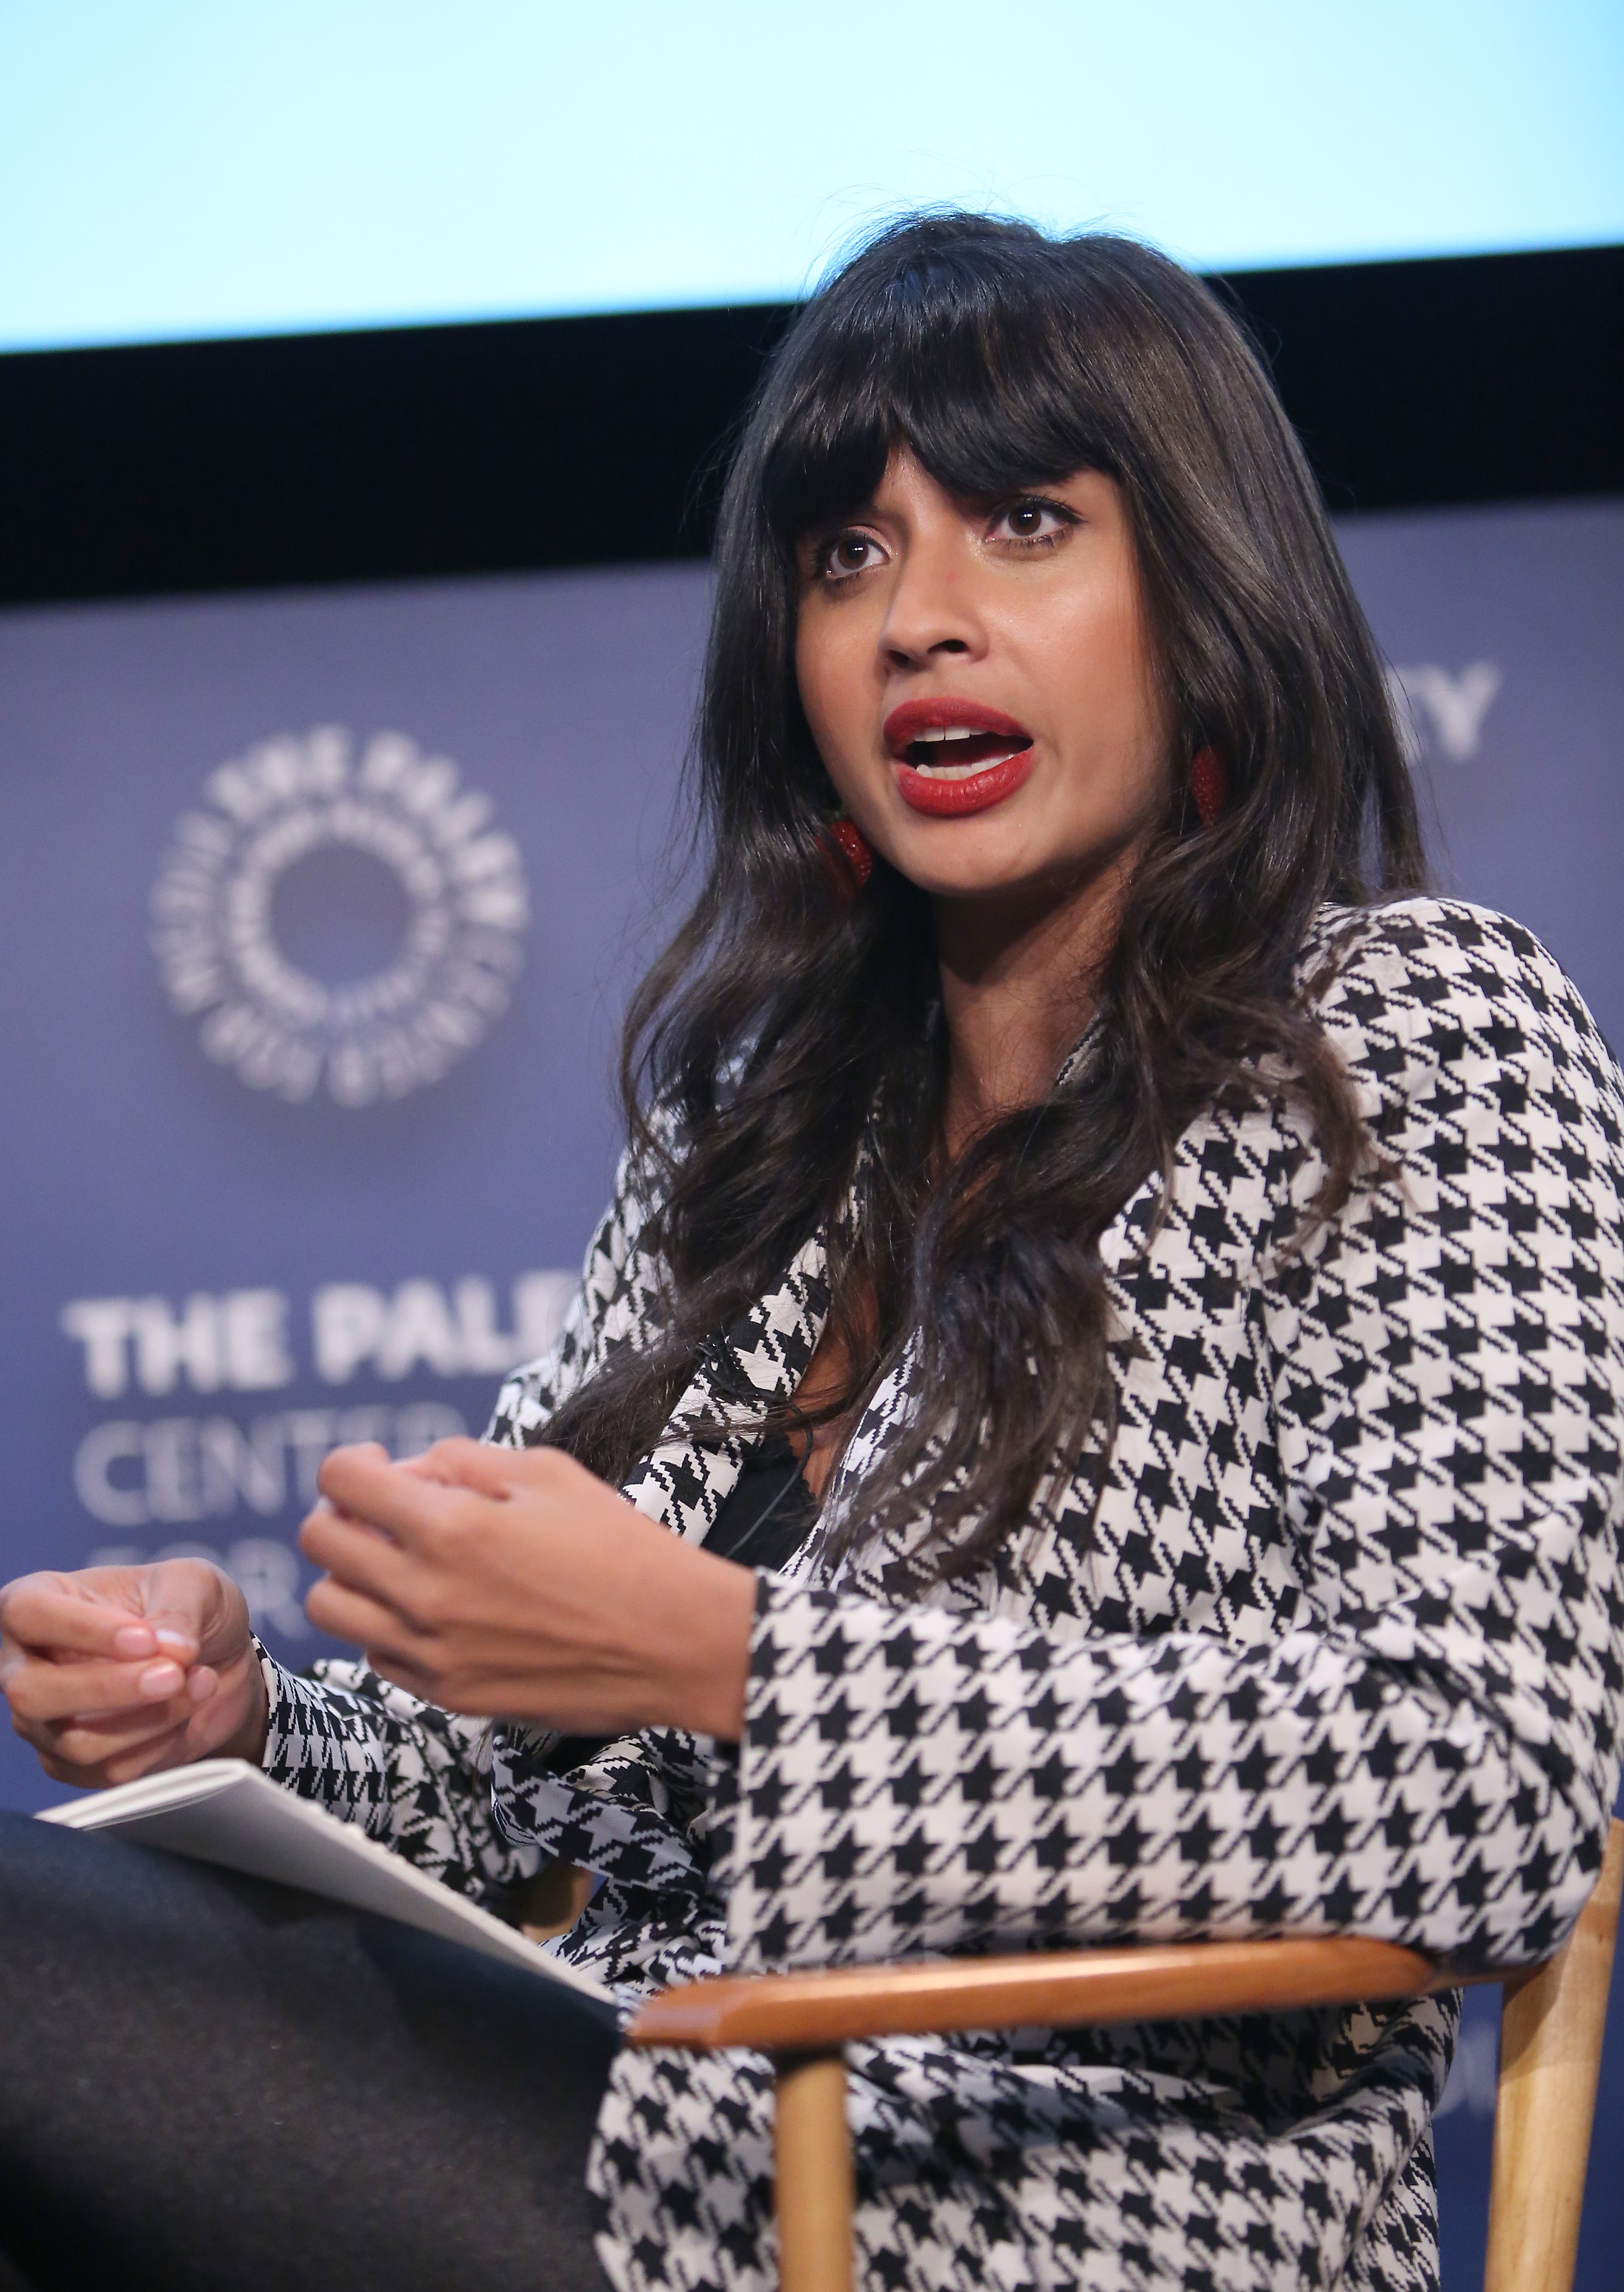  Jameela Jamil, actrice sur "The Good Place" | Photo : Getty Images